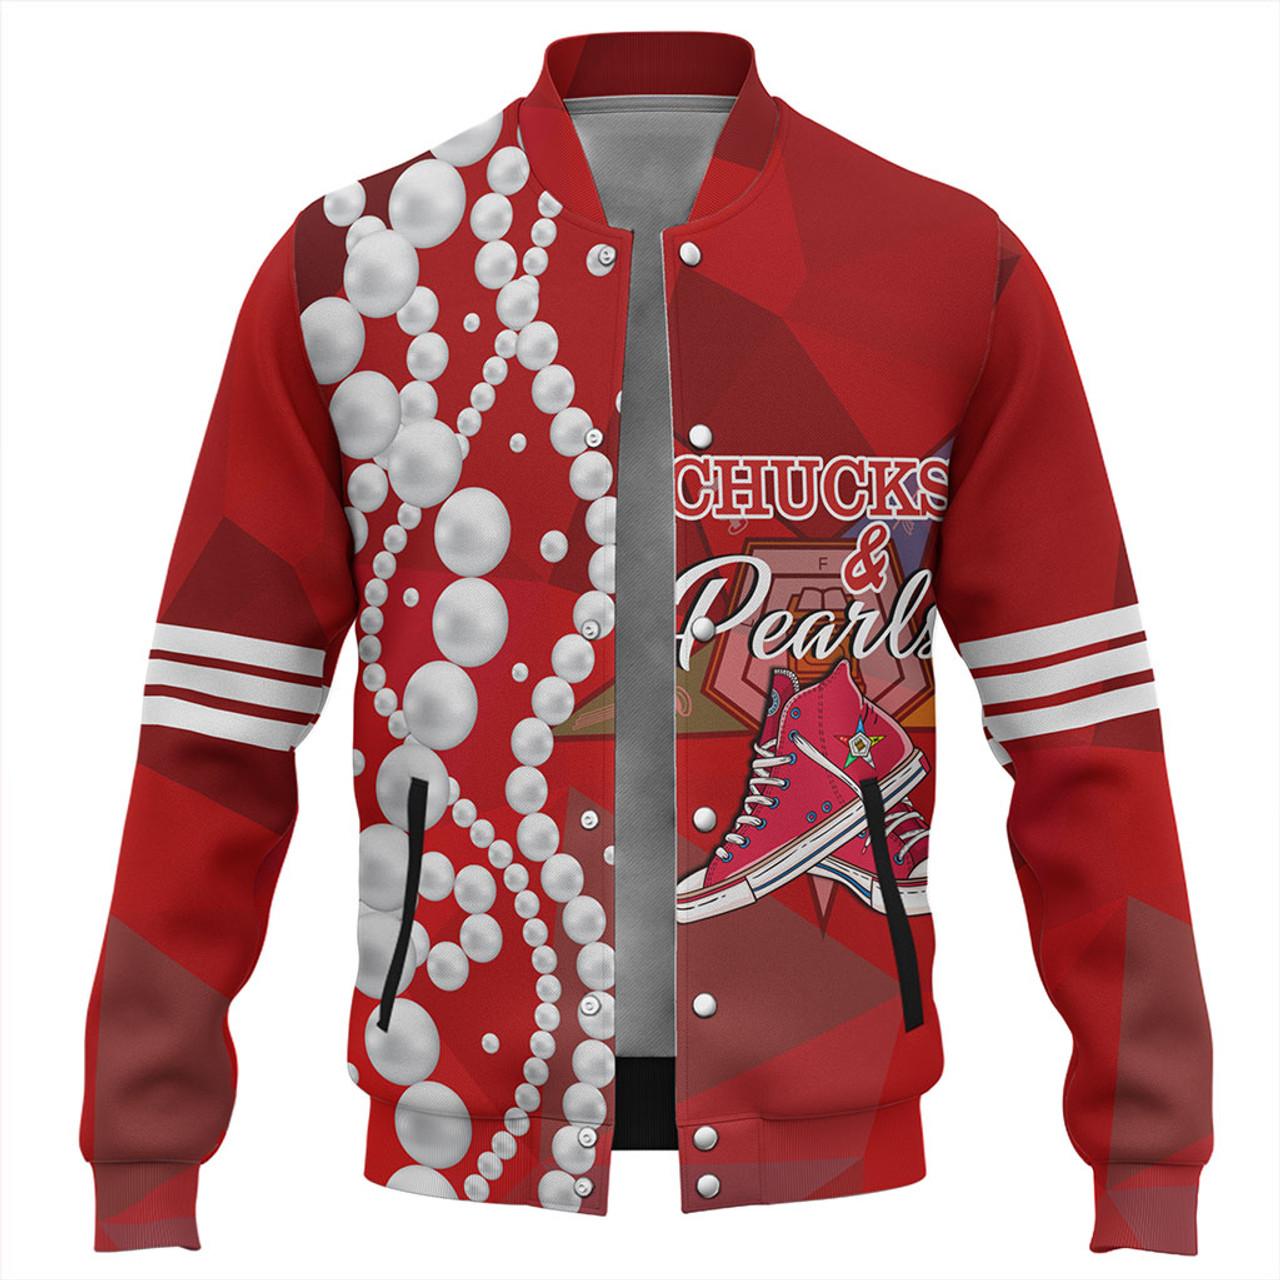 Order of the Eastern Star Baseball Jacket Greek Life Chuck And Pearls